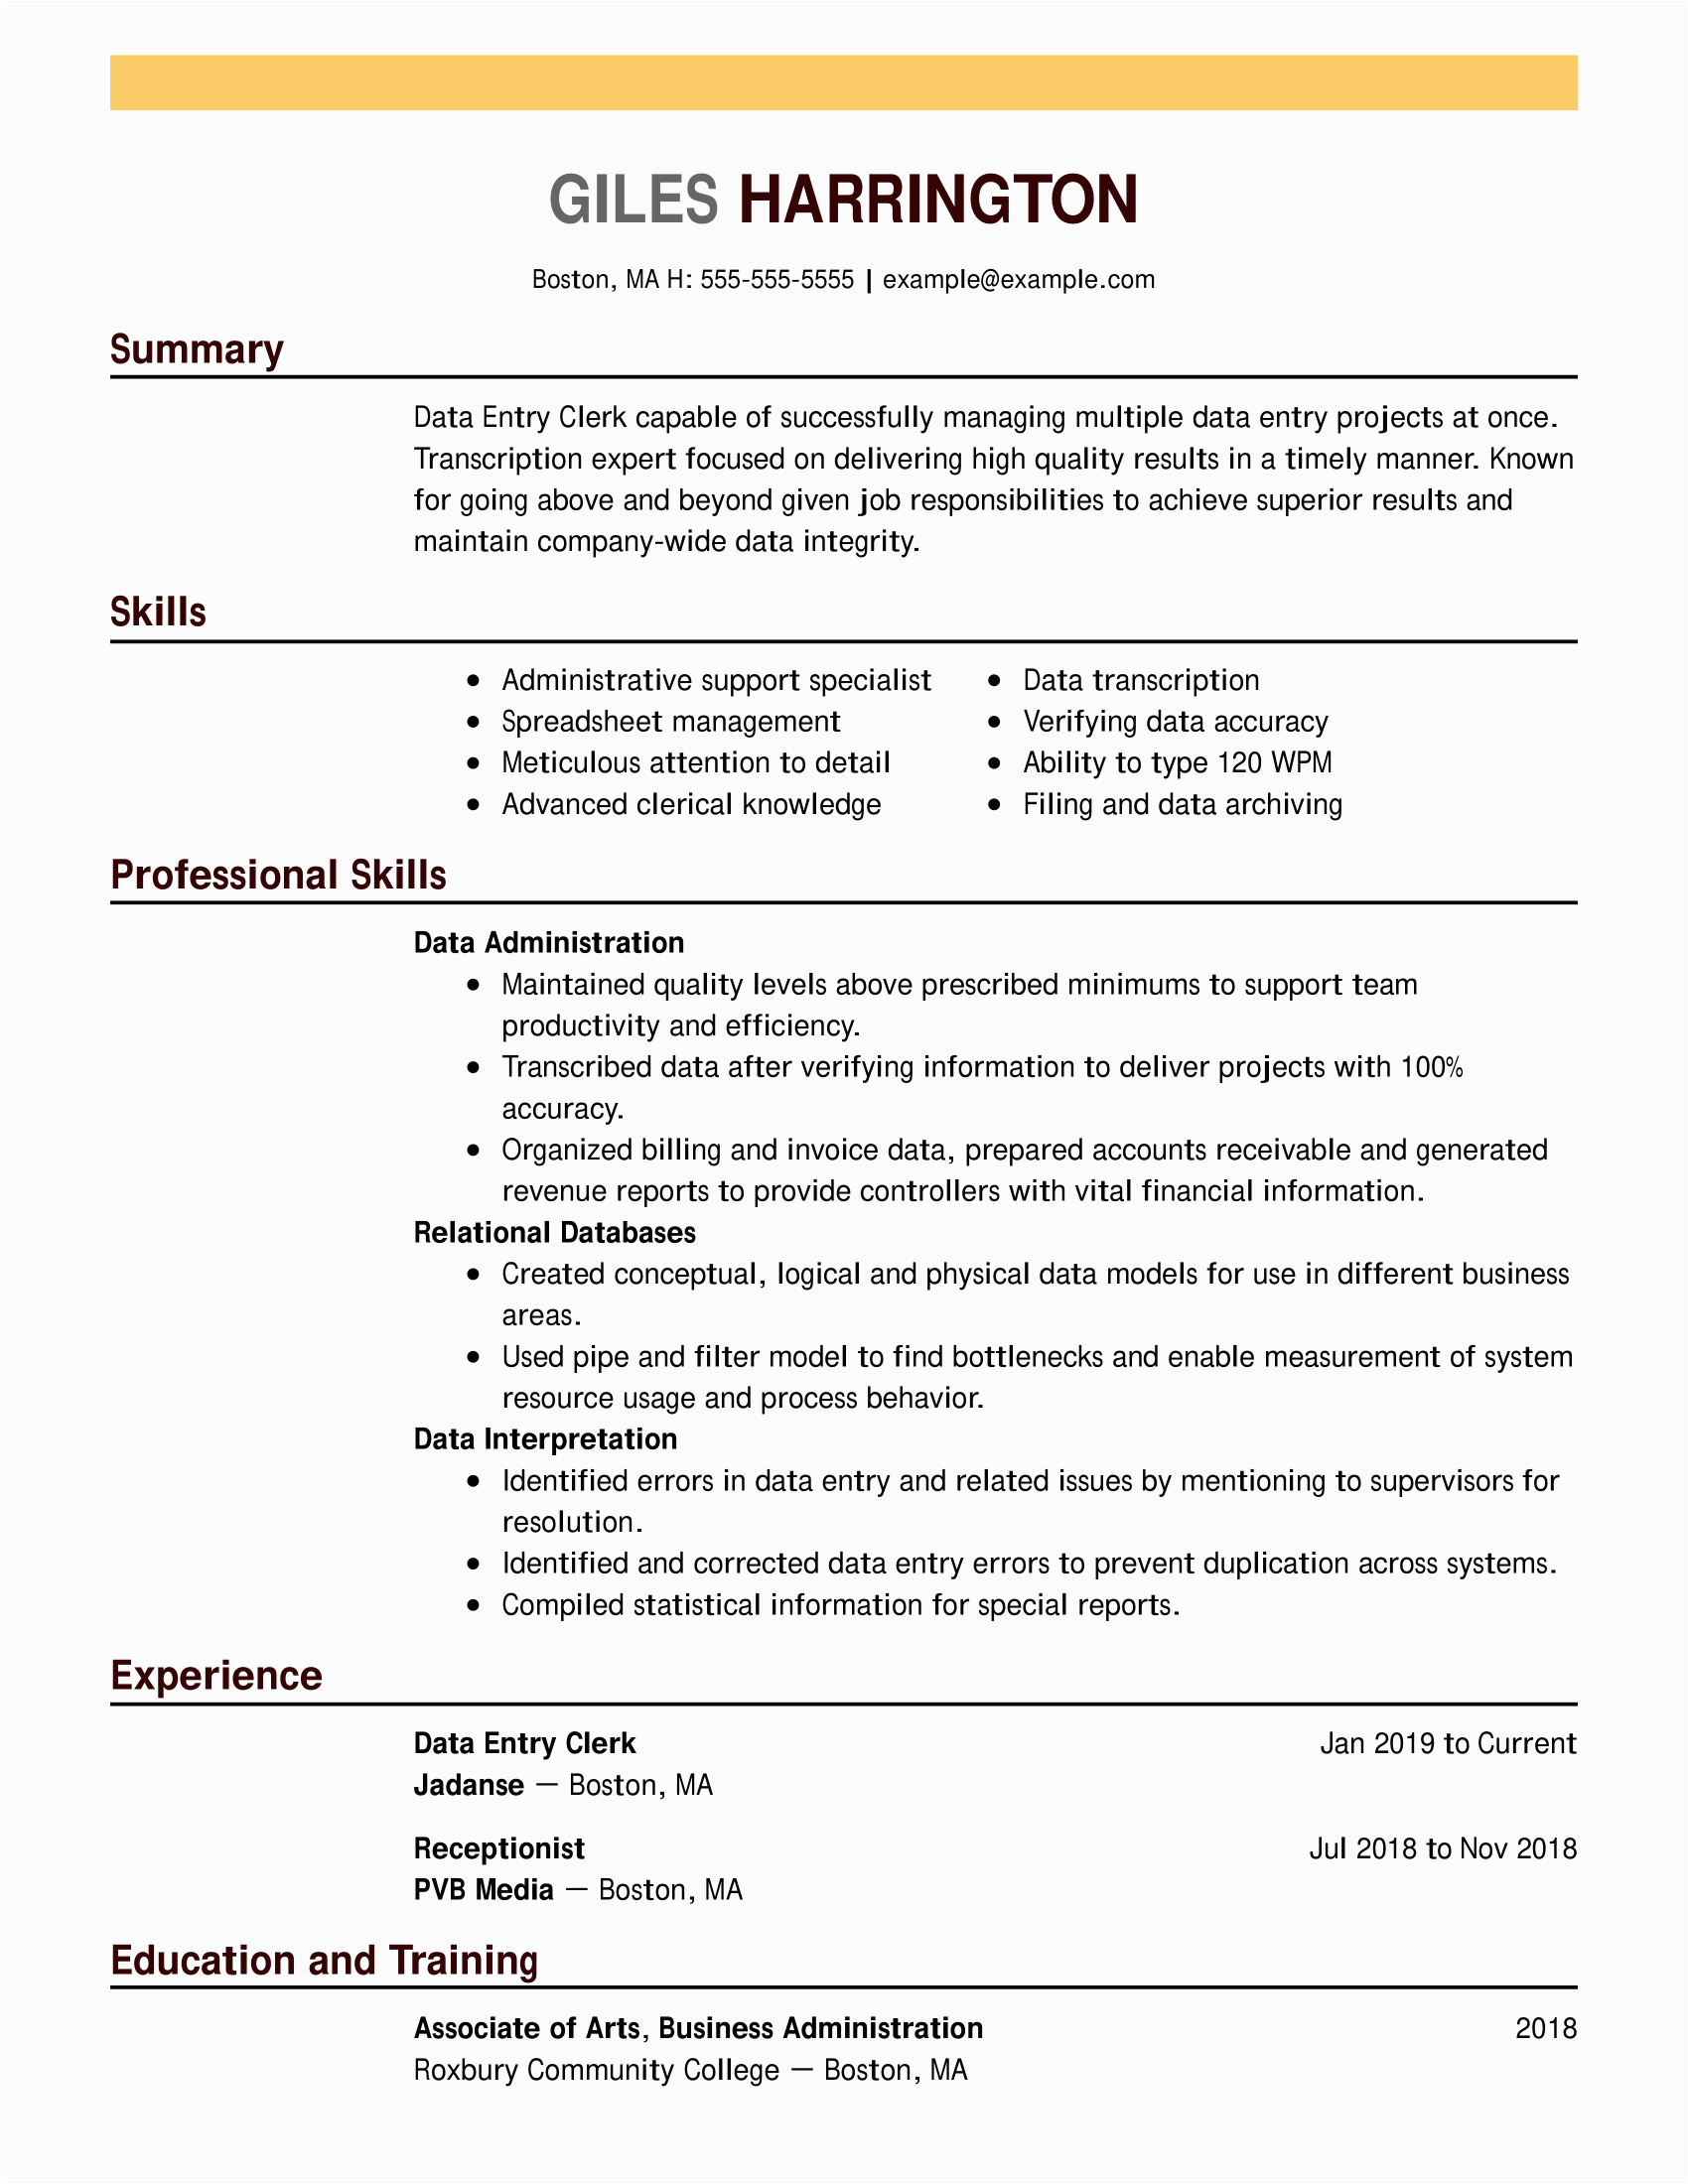 Sample Resume for Data Entry Position Customize This Outstanding Data Entry Resume 1